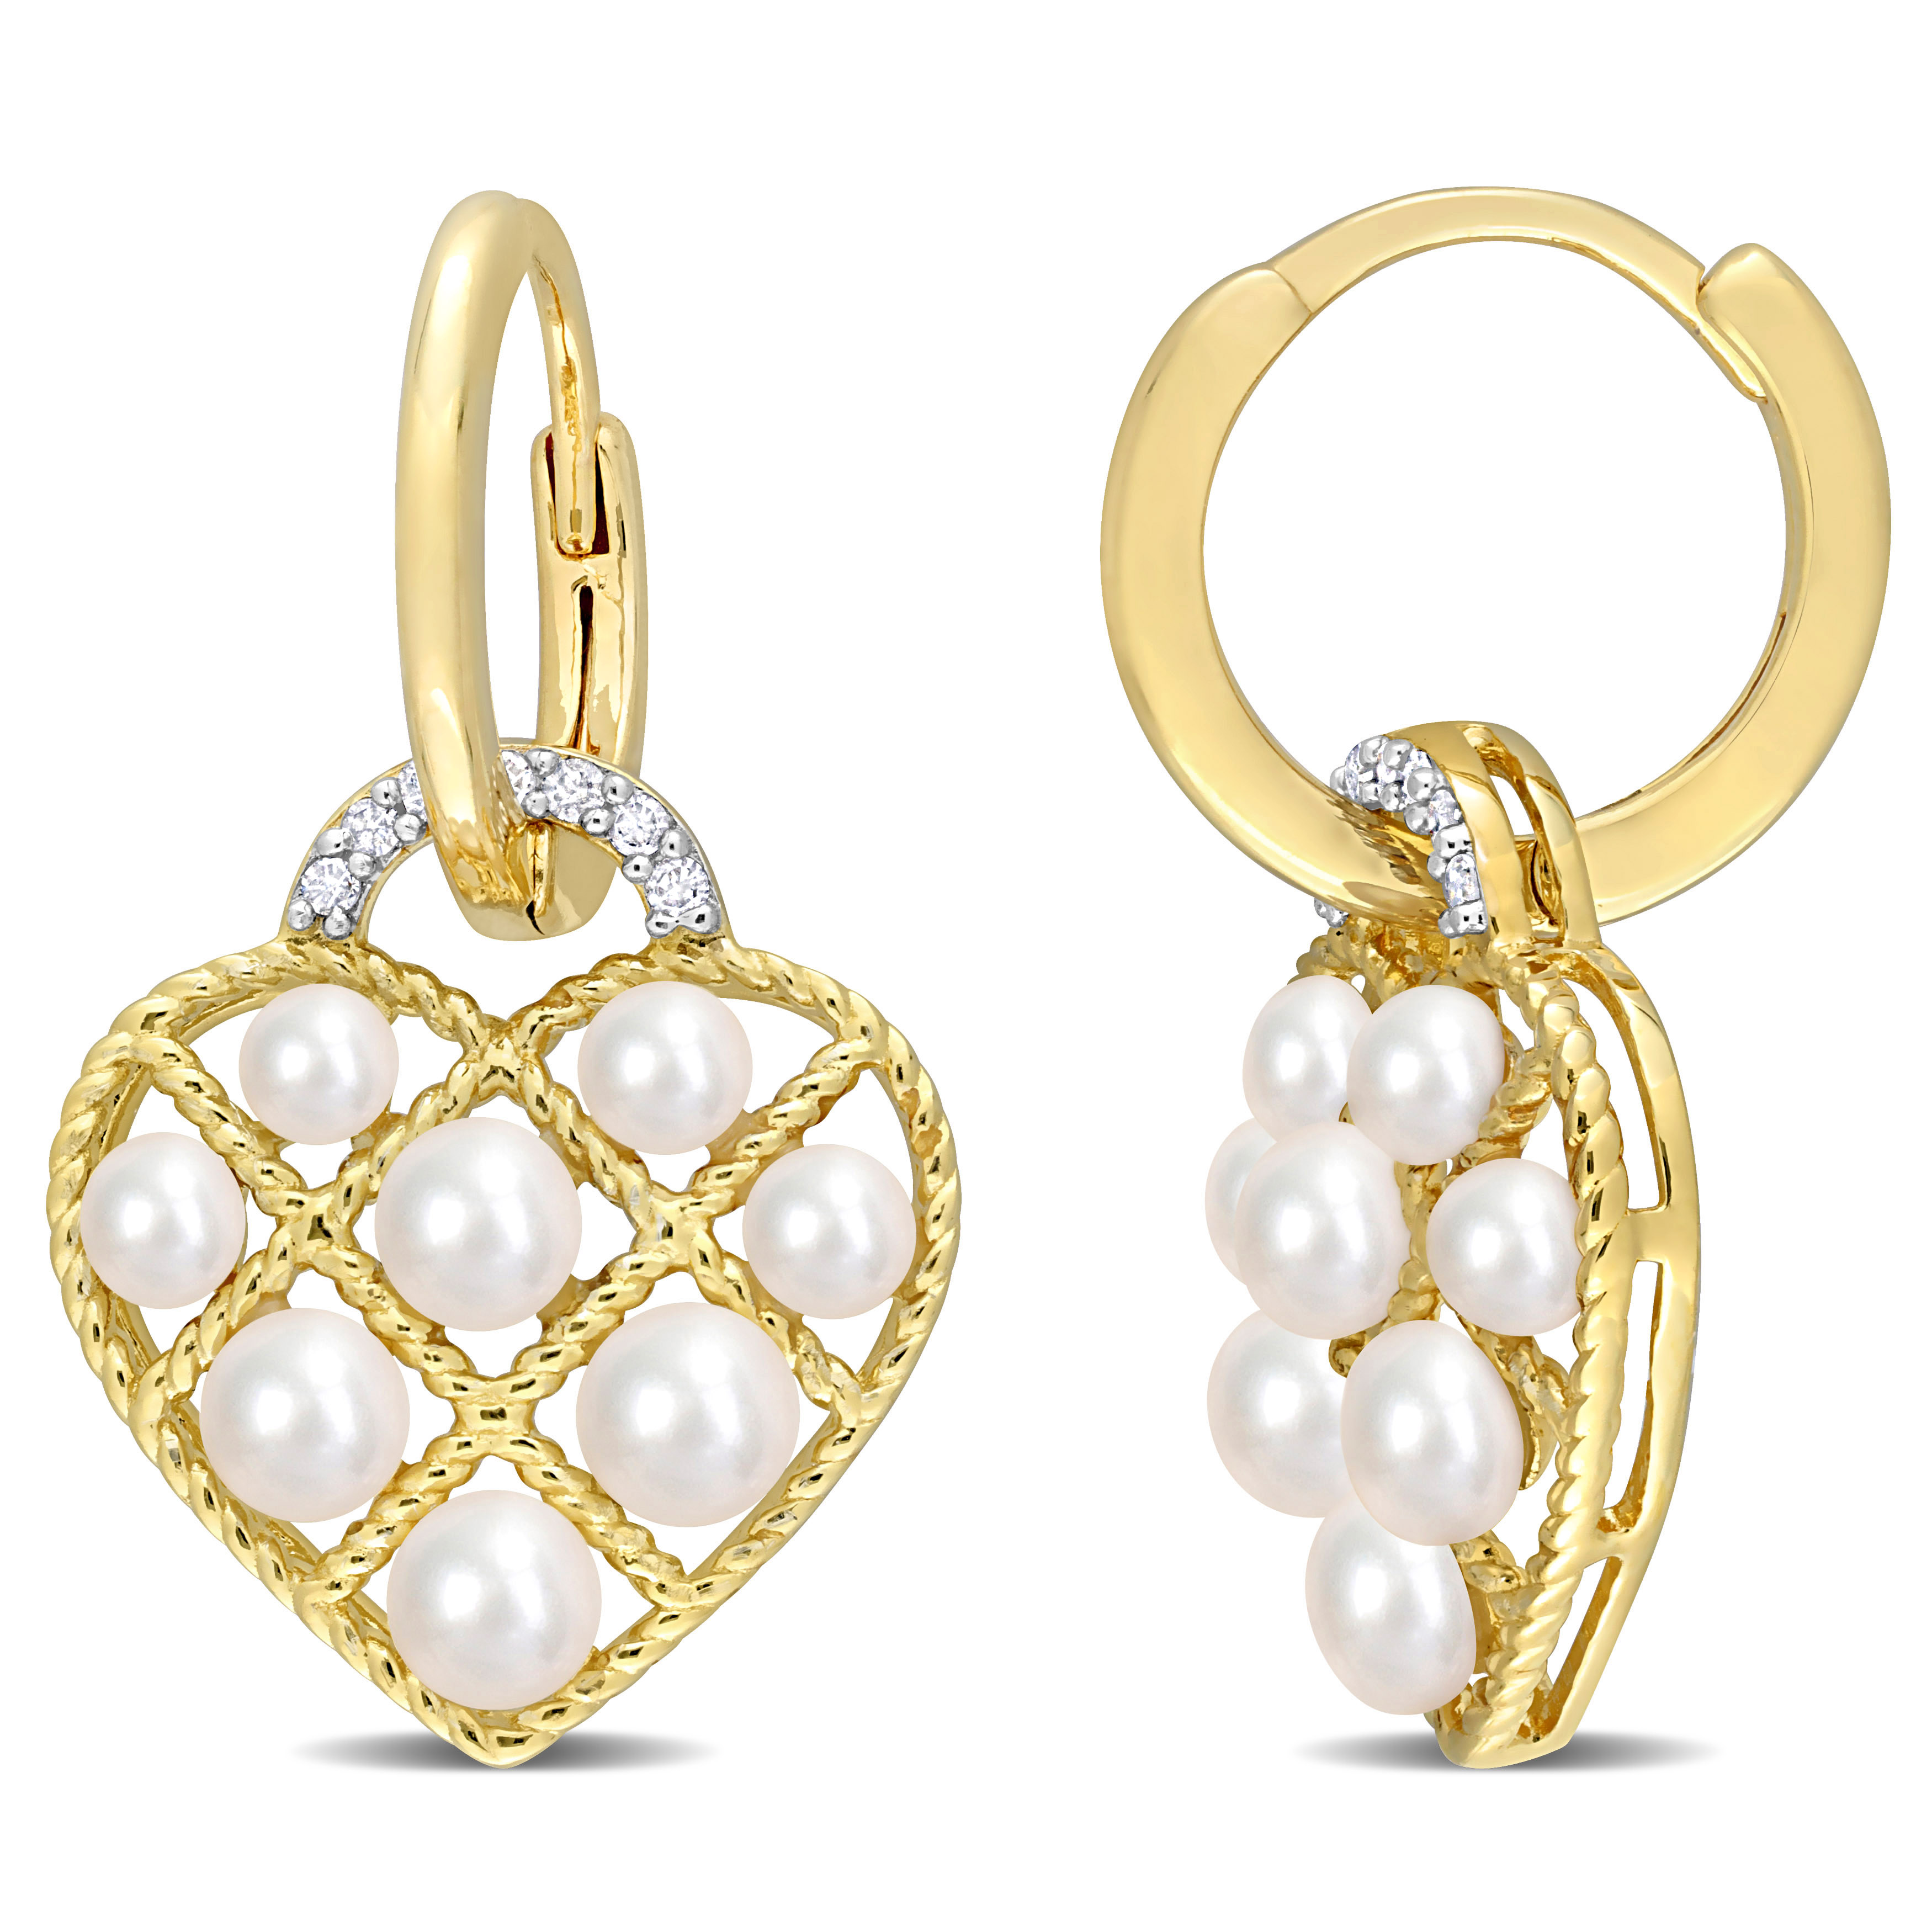 2.5 - 3 MM Cultured Freshwater Pearl and Diamond Accent Heart Hoop Earrings in Yellow Plated Sterling Silver